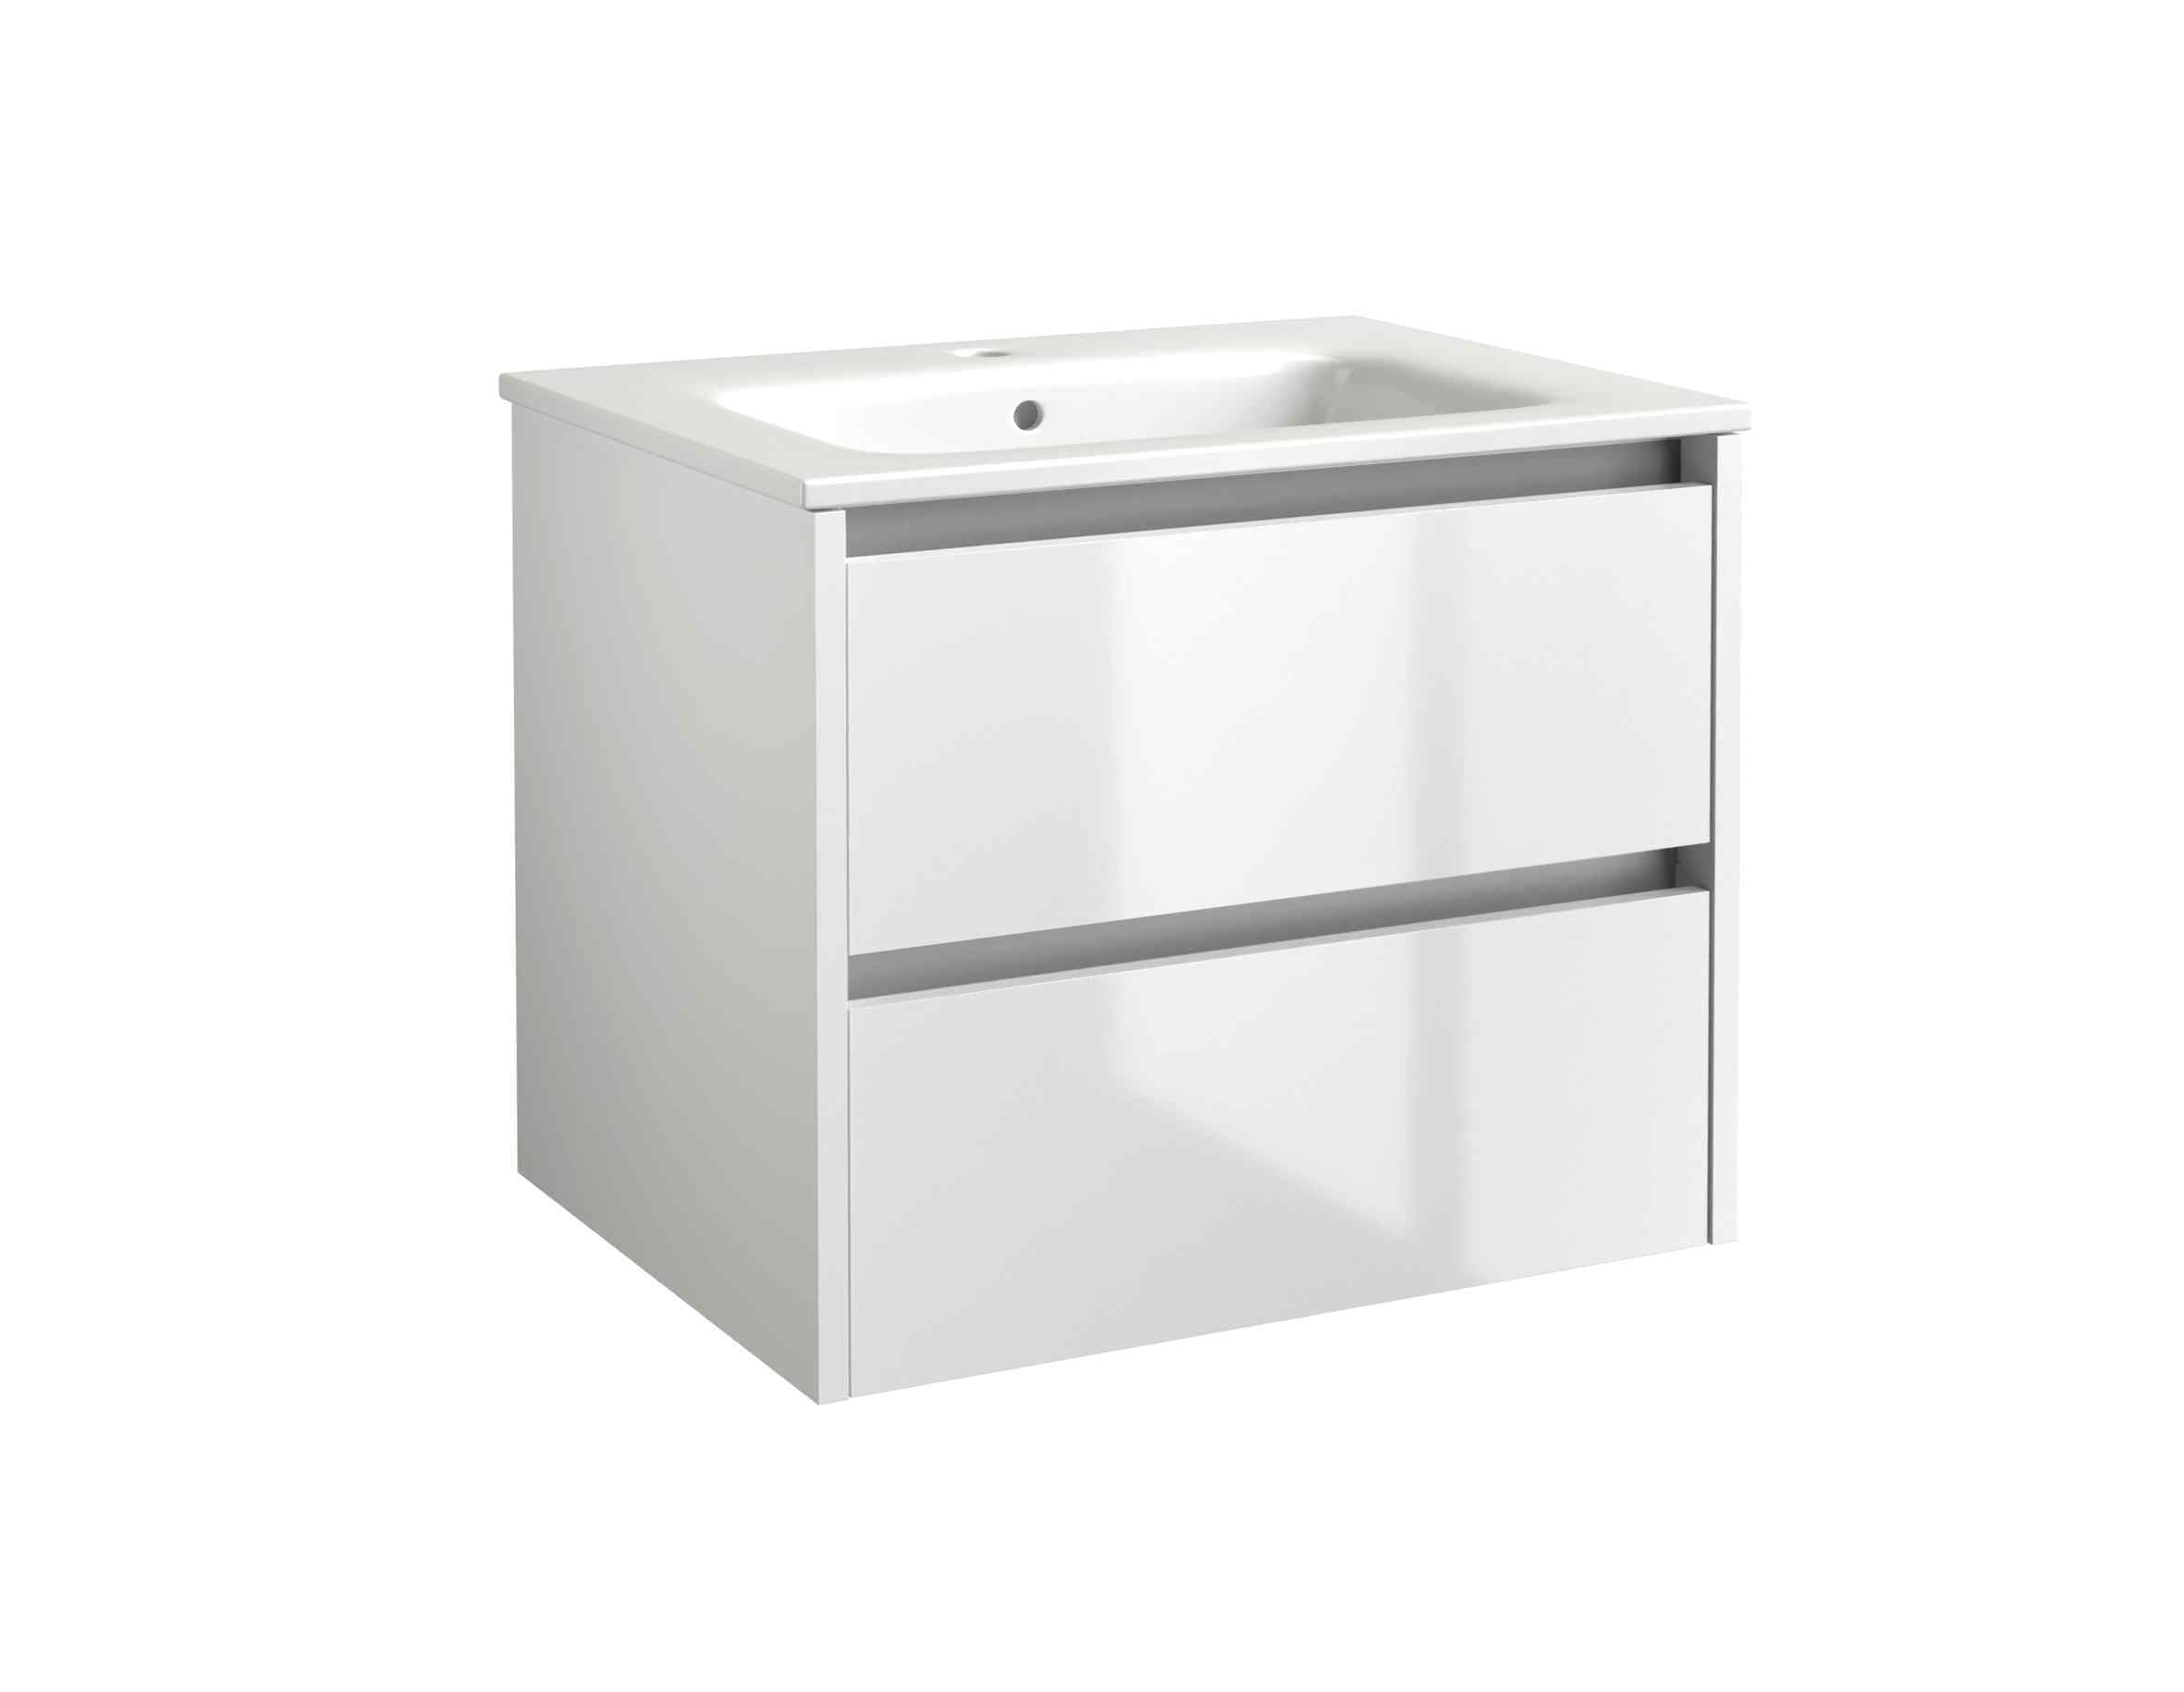 Kartell UK City White Gloss Bathroom Suite with Vanity Unit and Ark Duo Bath